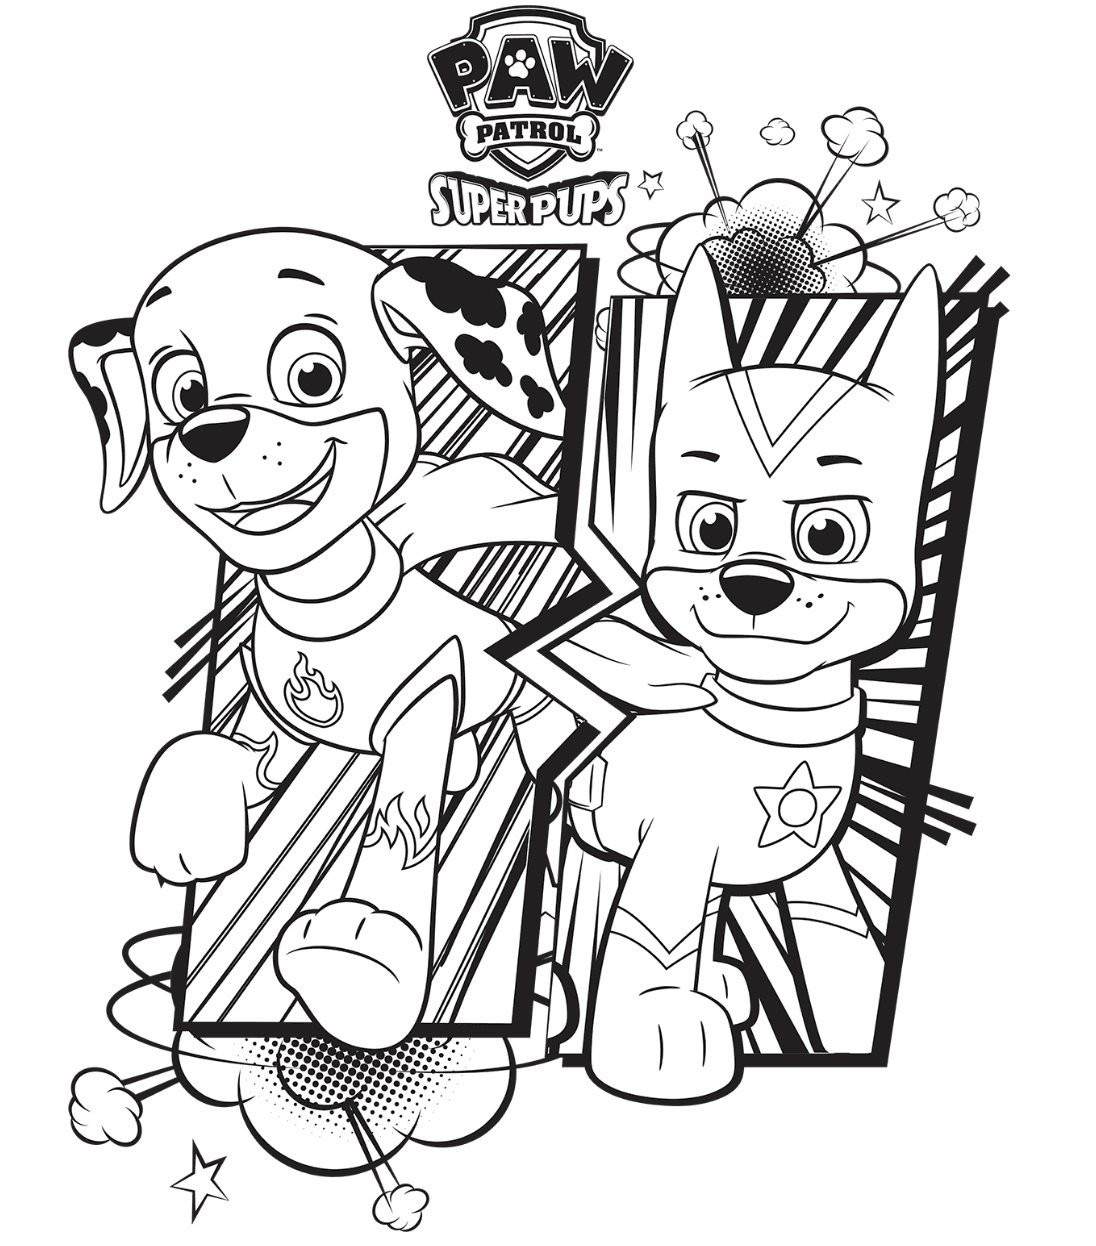 901 Cartoon Paw Patrol Mission Paw Coloring Pages with Animal character